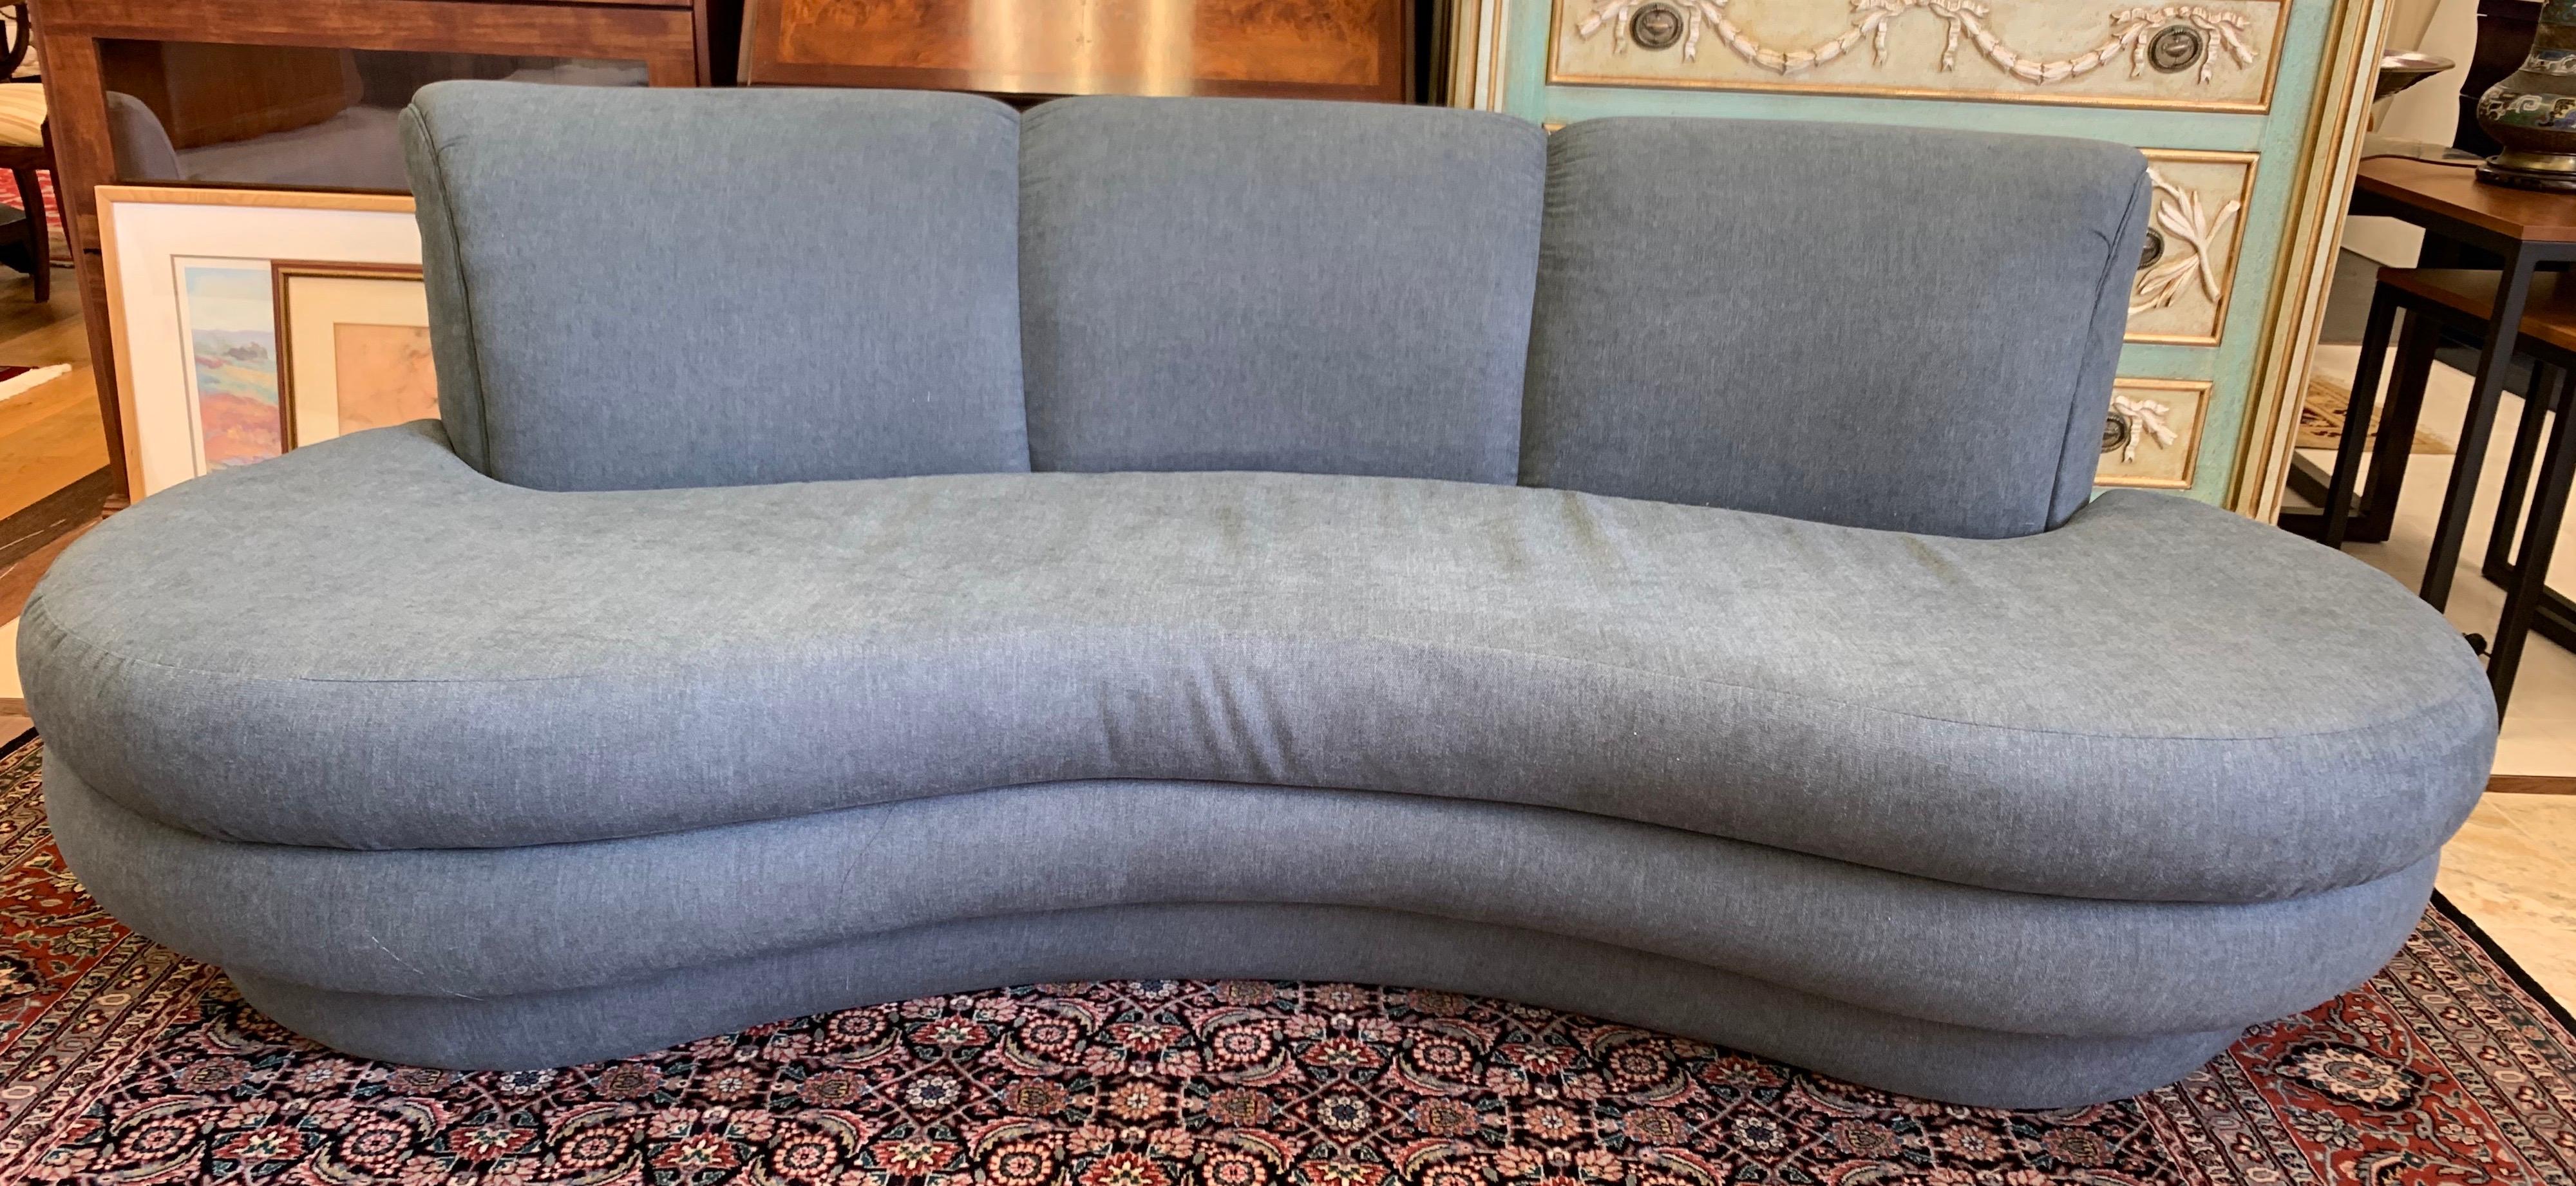 Adrian Pearsall Cloud Sofa for Comfort Designs Newly Upholstered in Slate Gray  10